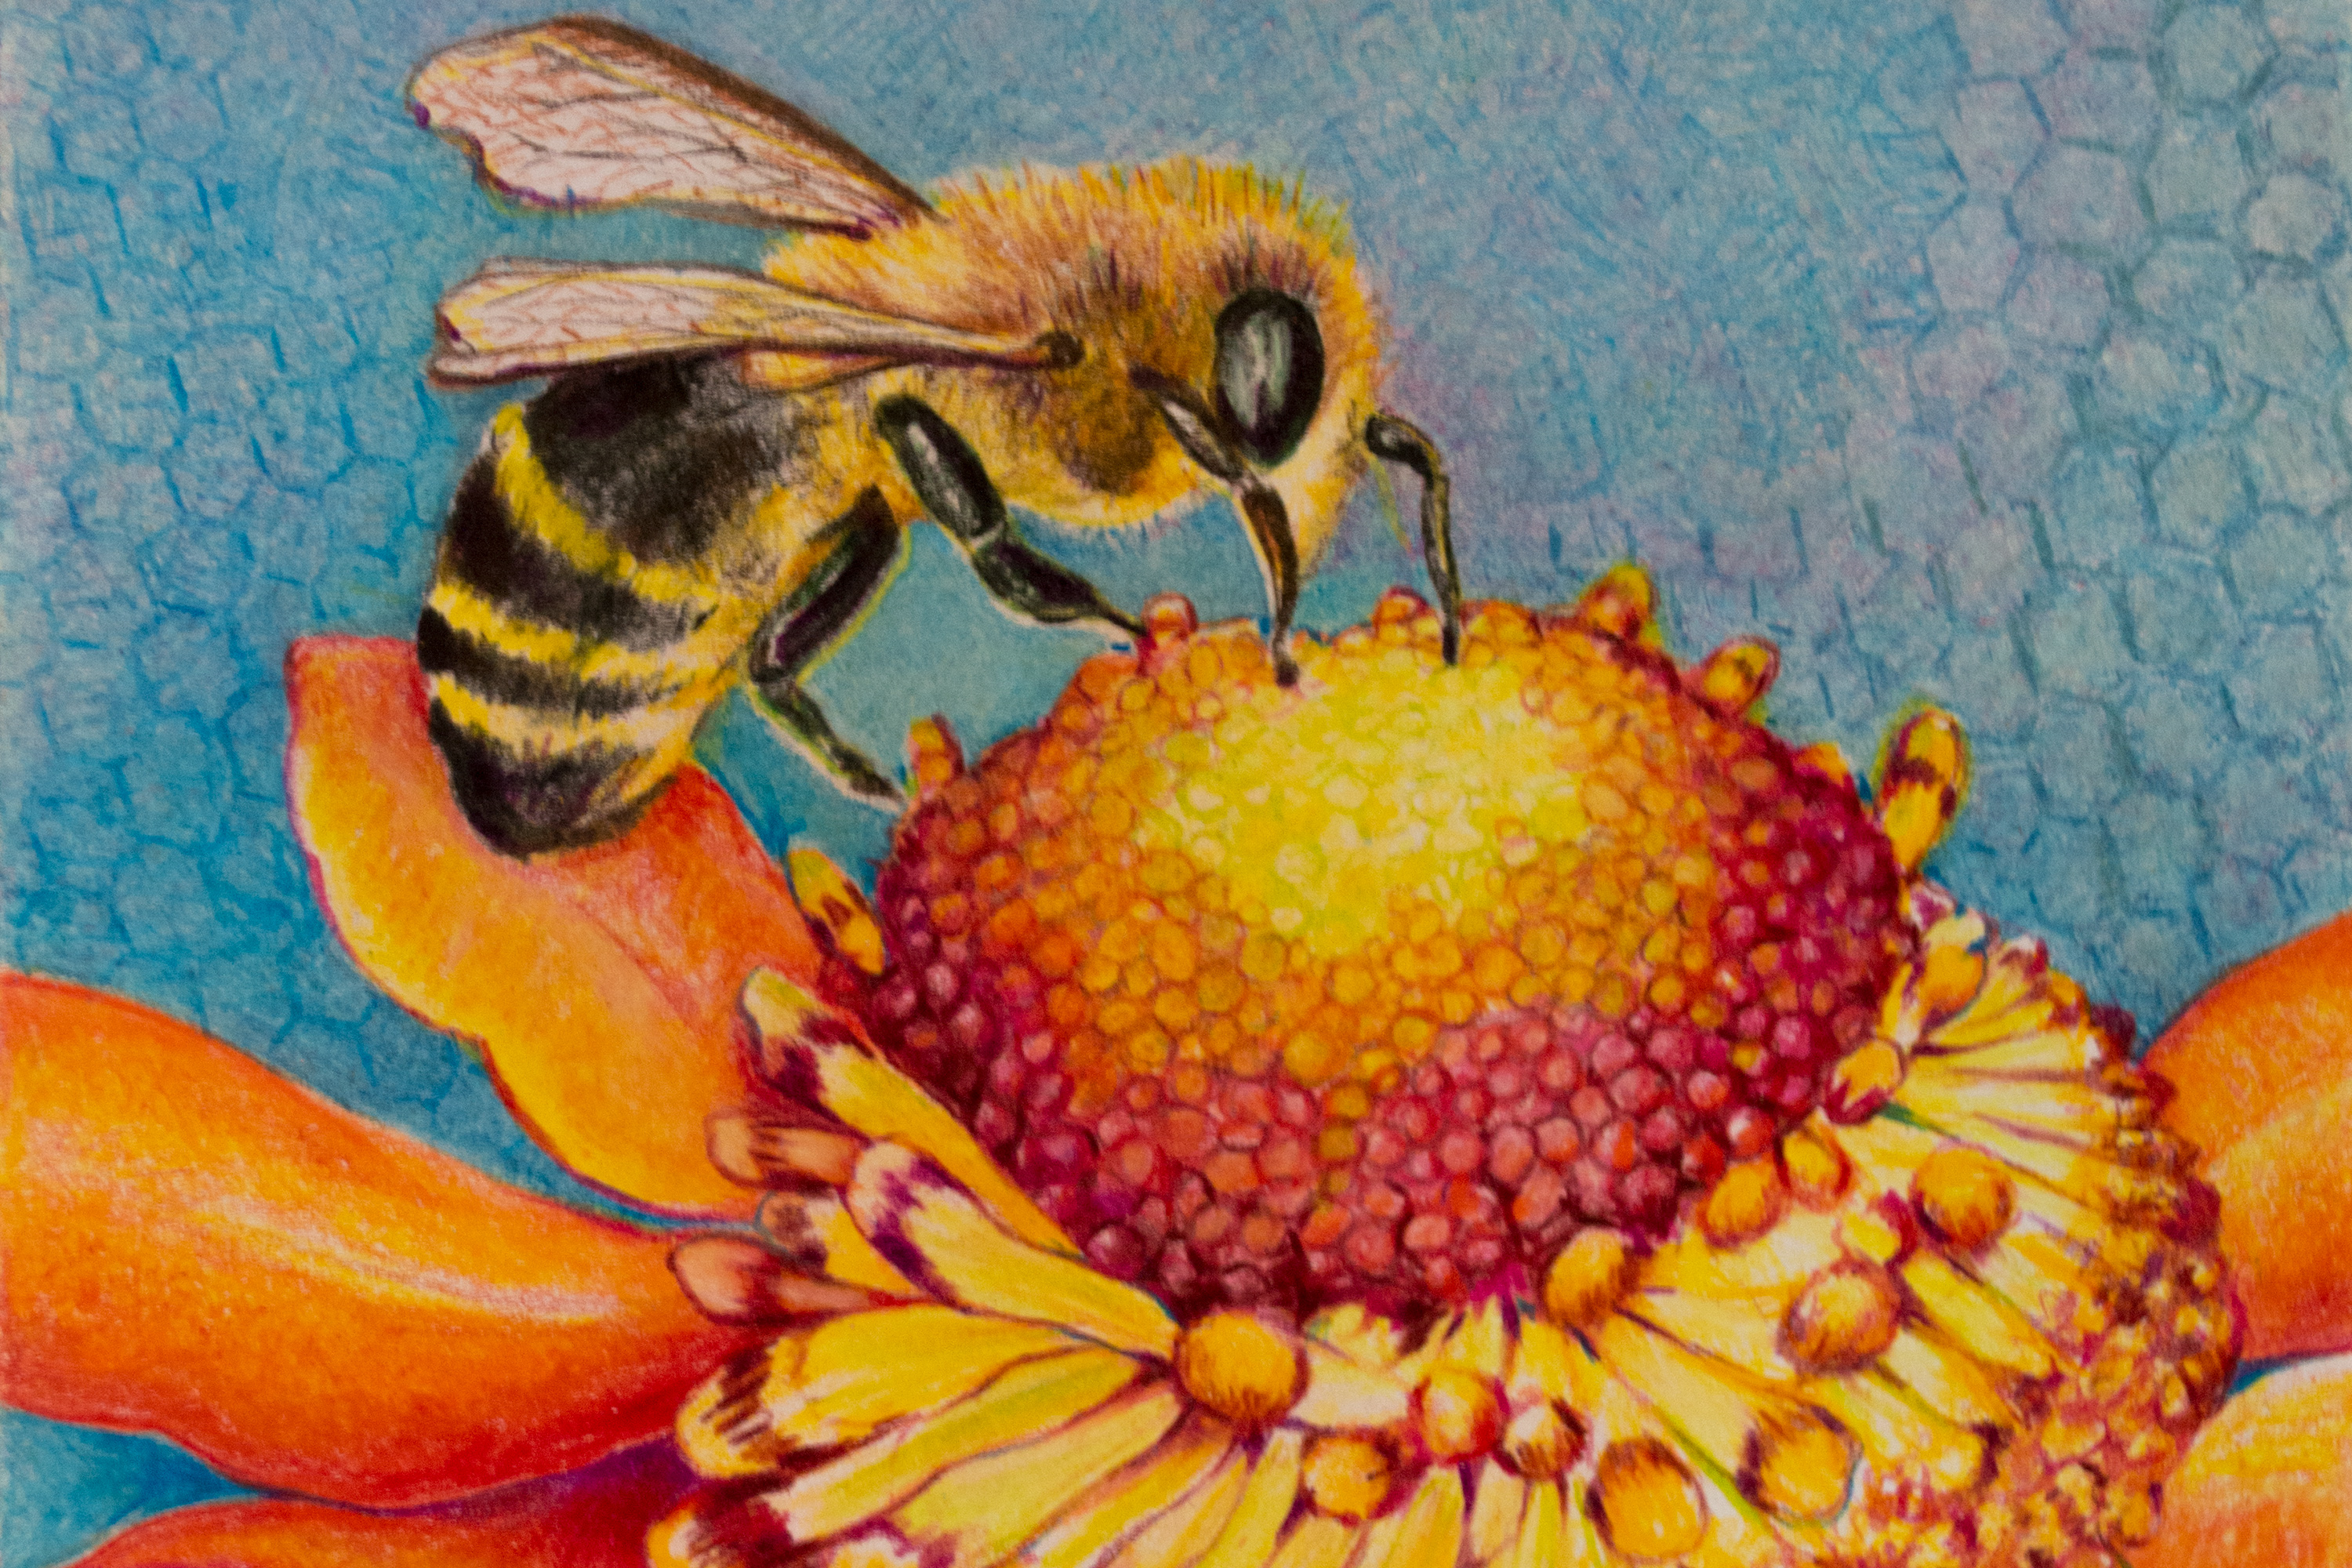 colored pencil drawing of a honey bee gathering nectar